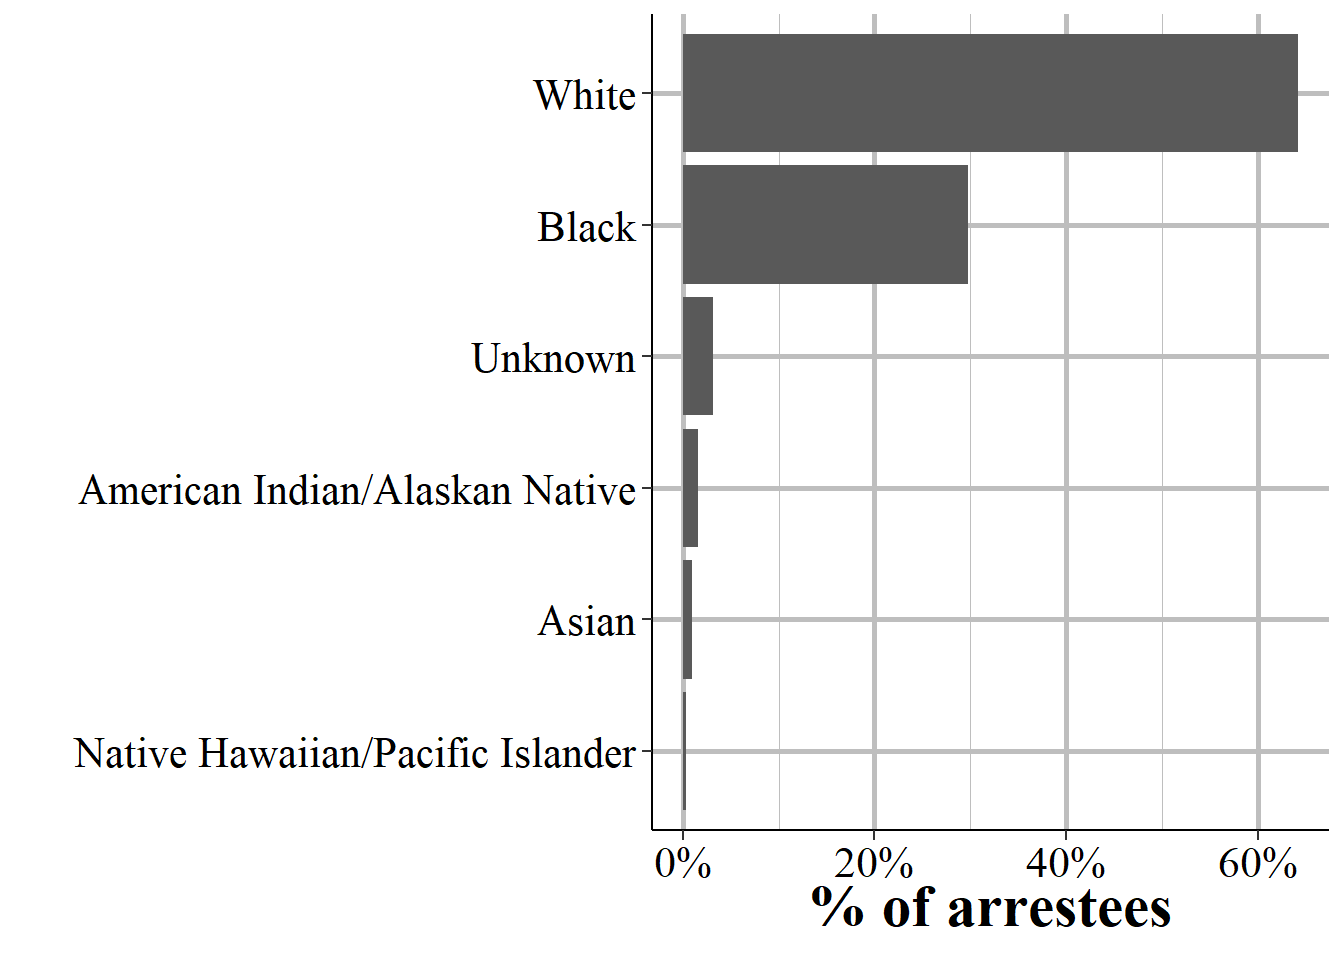 The race of all arrestees reported in the 2019 NIBRS data.